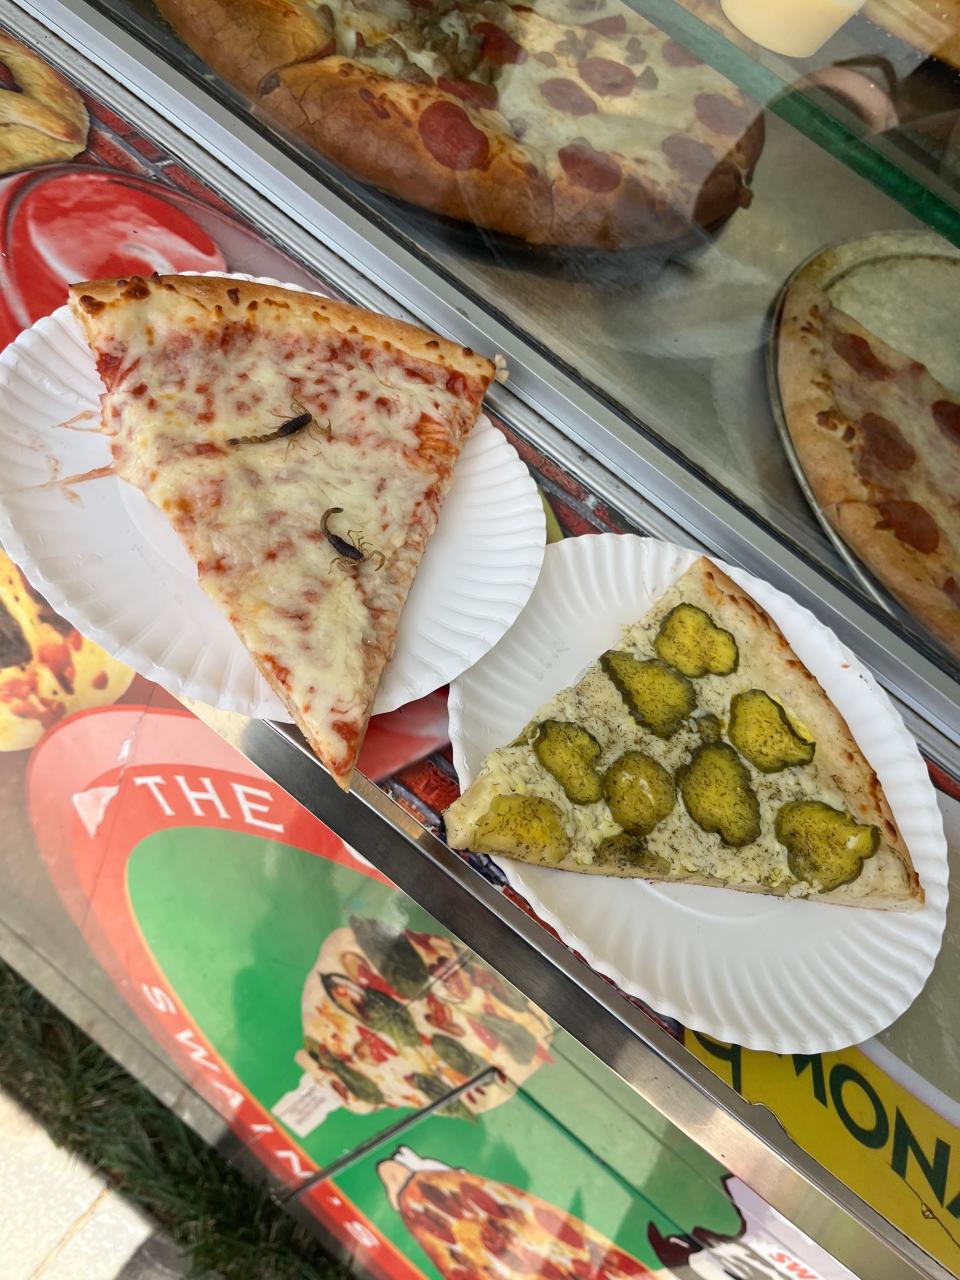 Scorpion pizza and pickle pizza at the Indiana State Fair.